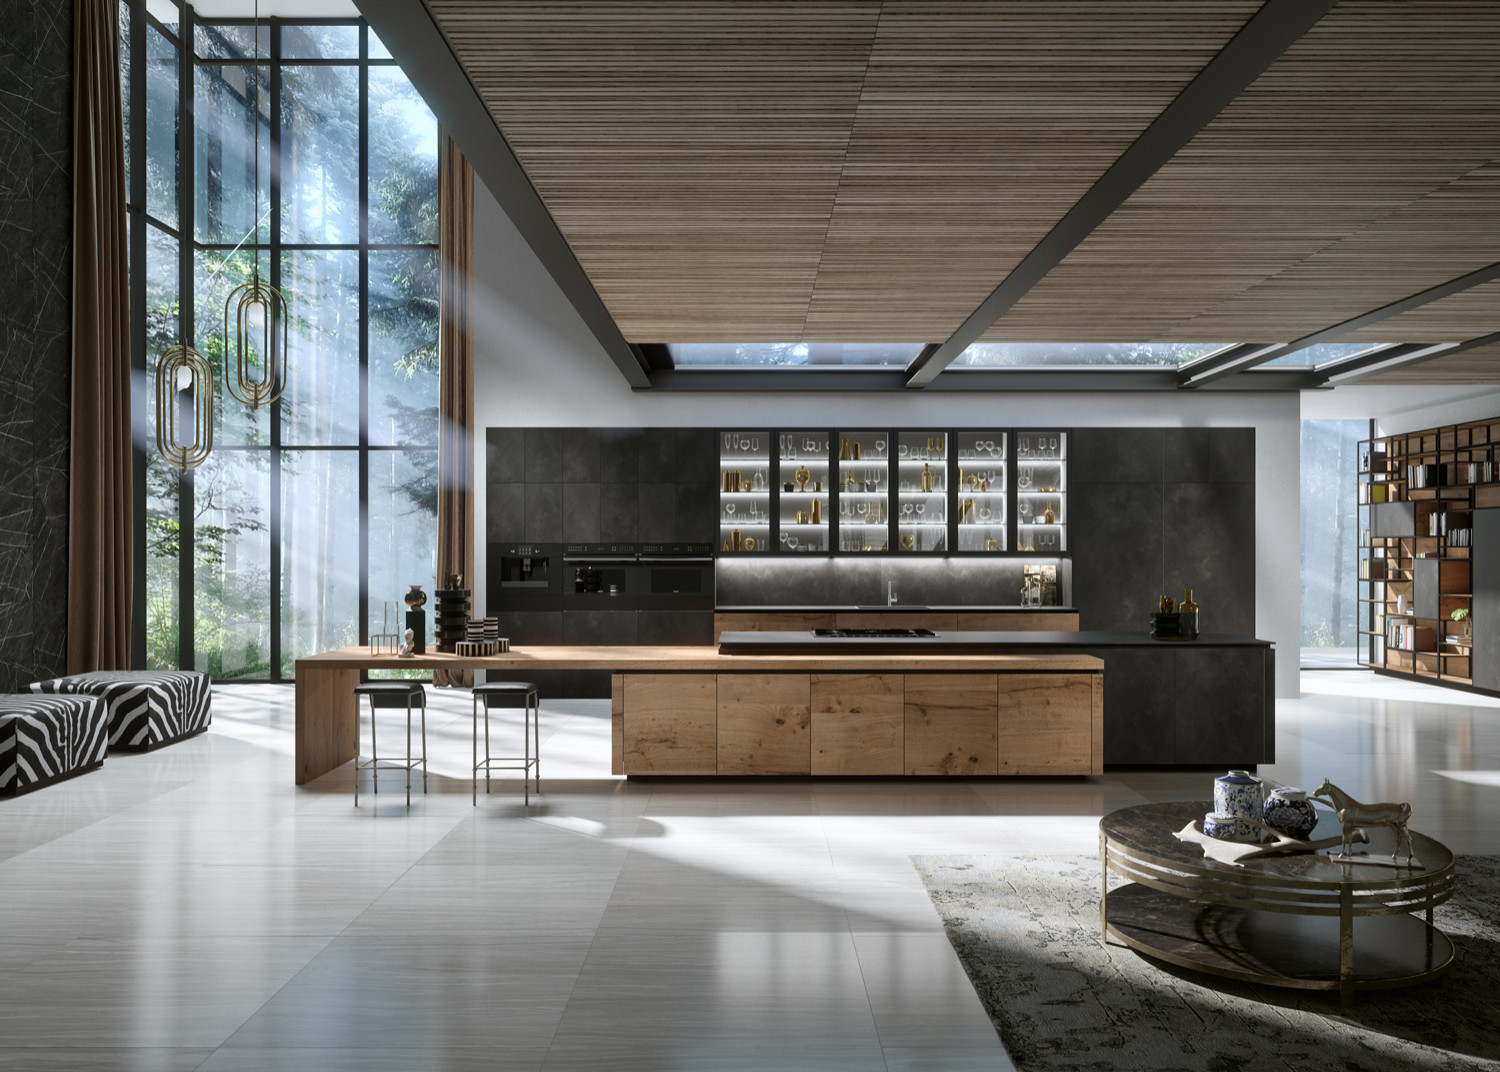 Featured Kitchens